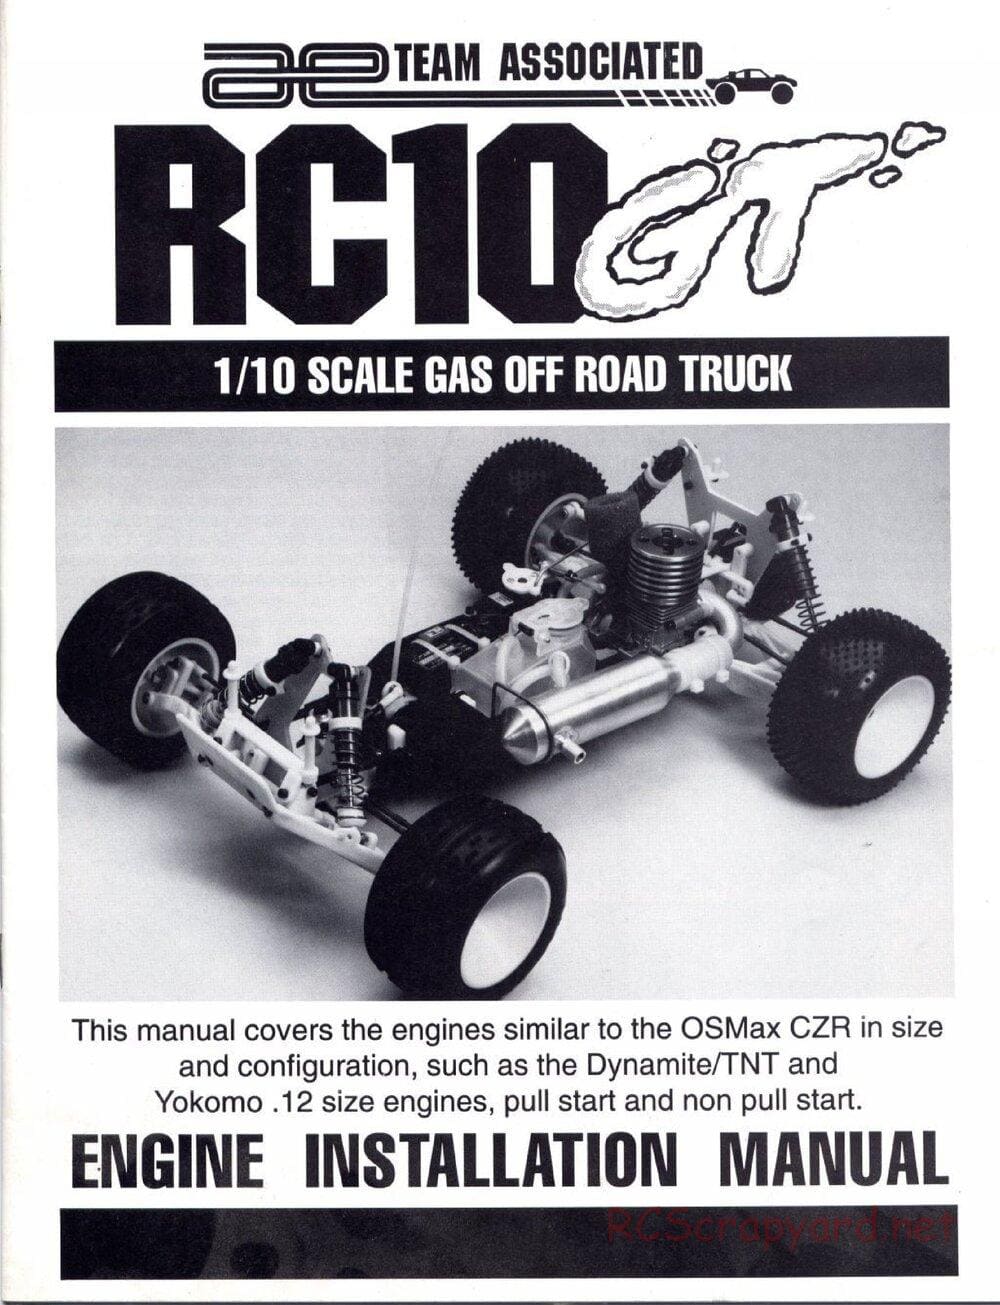 Team Associated - RC10GT (1993) - Motor Installation Manual - Page 1